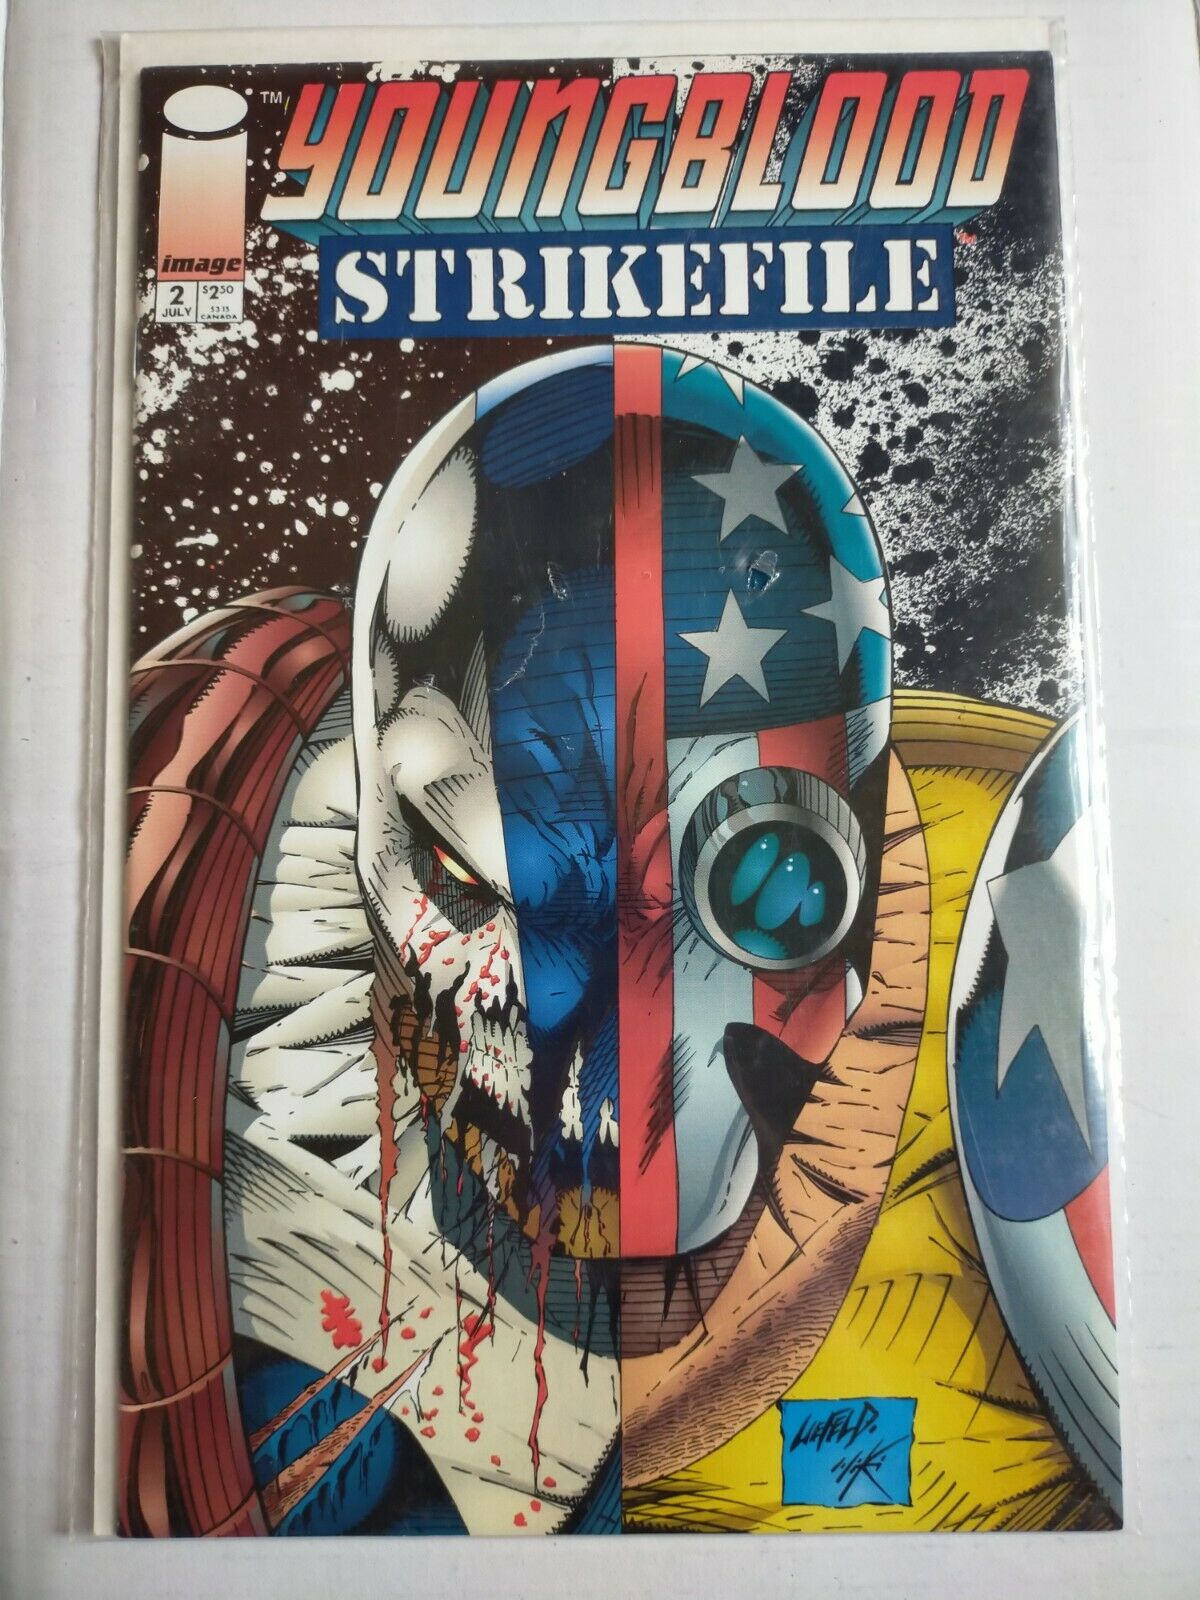 Image Comic Book Youngblood Strikefile No.2 July